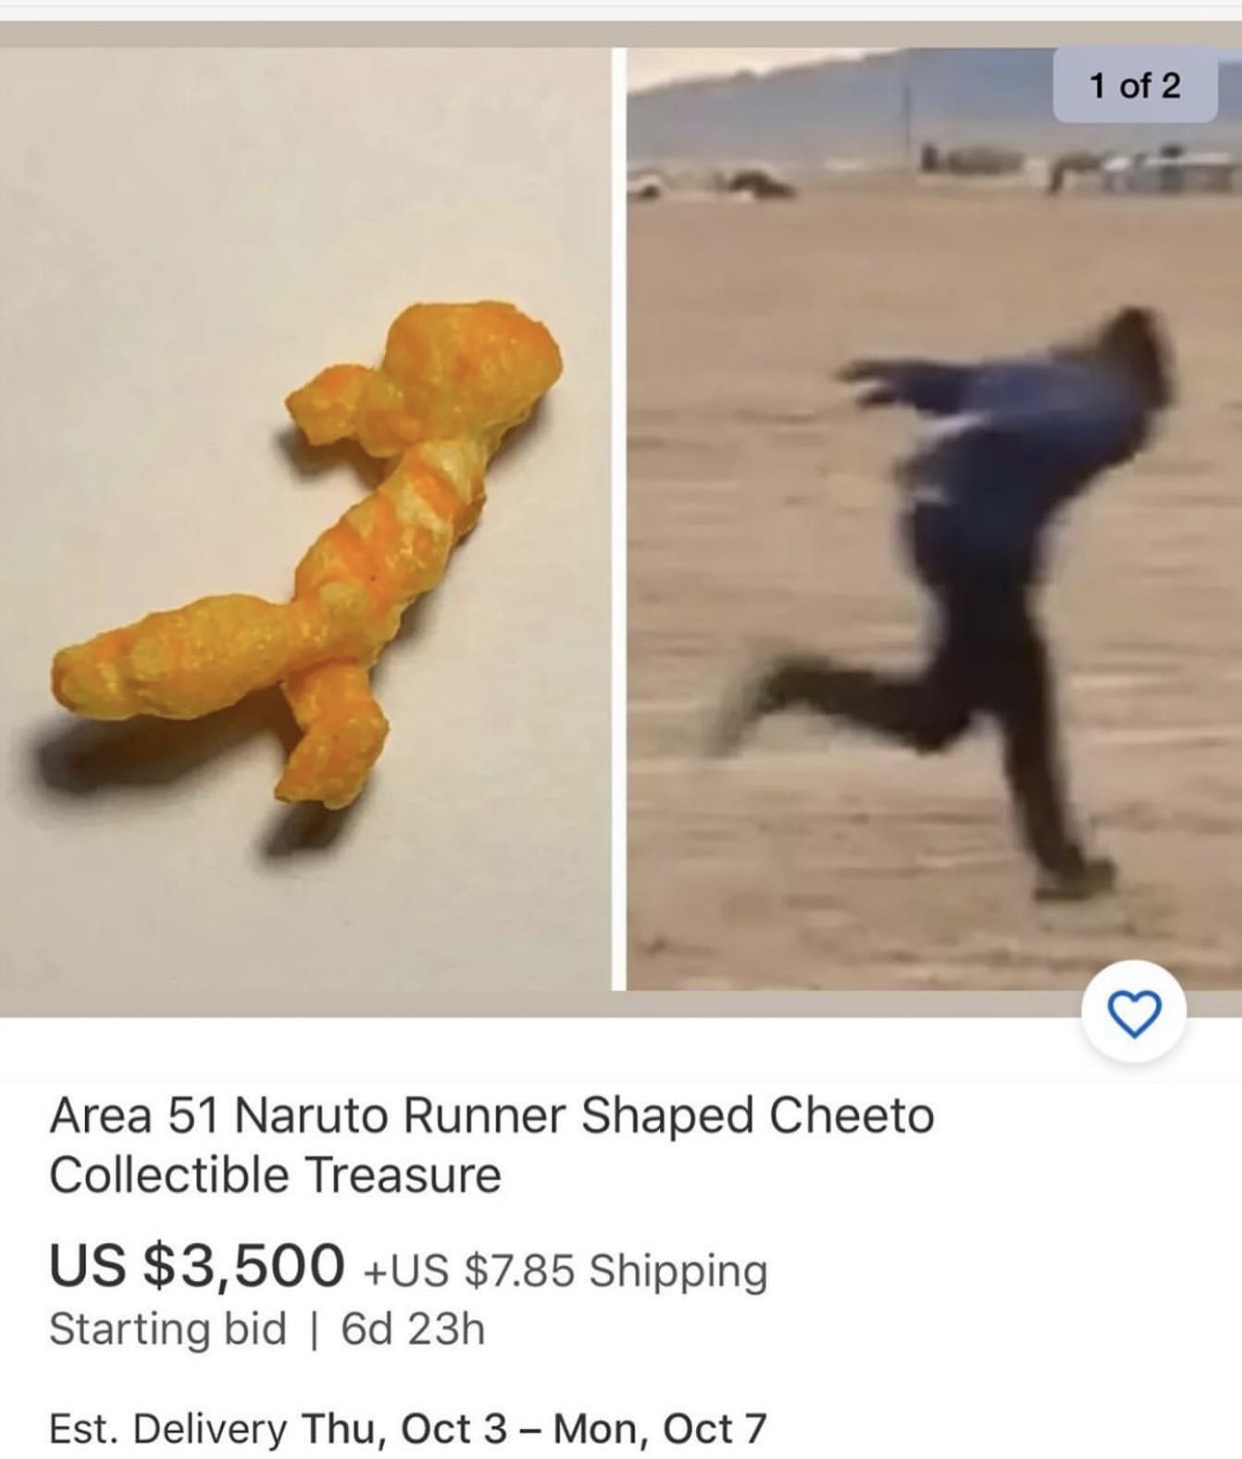 naruto runner shaped cheeto - 1 of 2 Area 51 Naruto Runner Shaped Cheeto Collectible Treasure Us $3,500 Us $7.85 Shipping Starting bid | 6d 23h Est. Delivery Thu, Oct 3 Mon, Oct 7